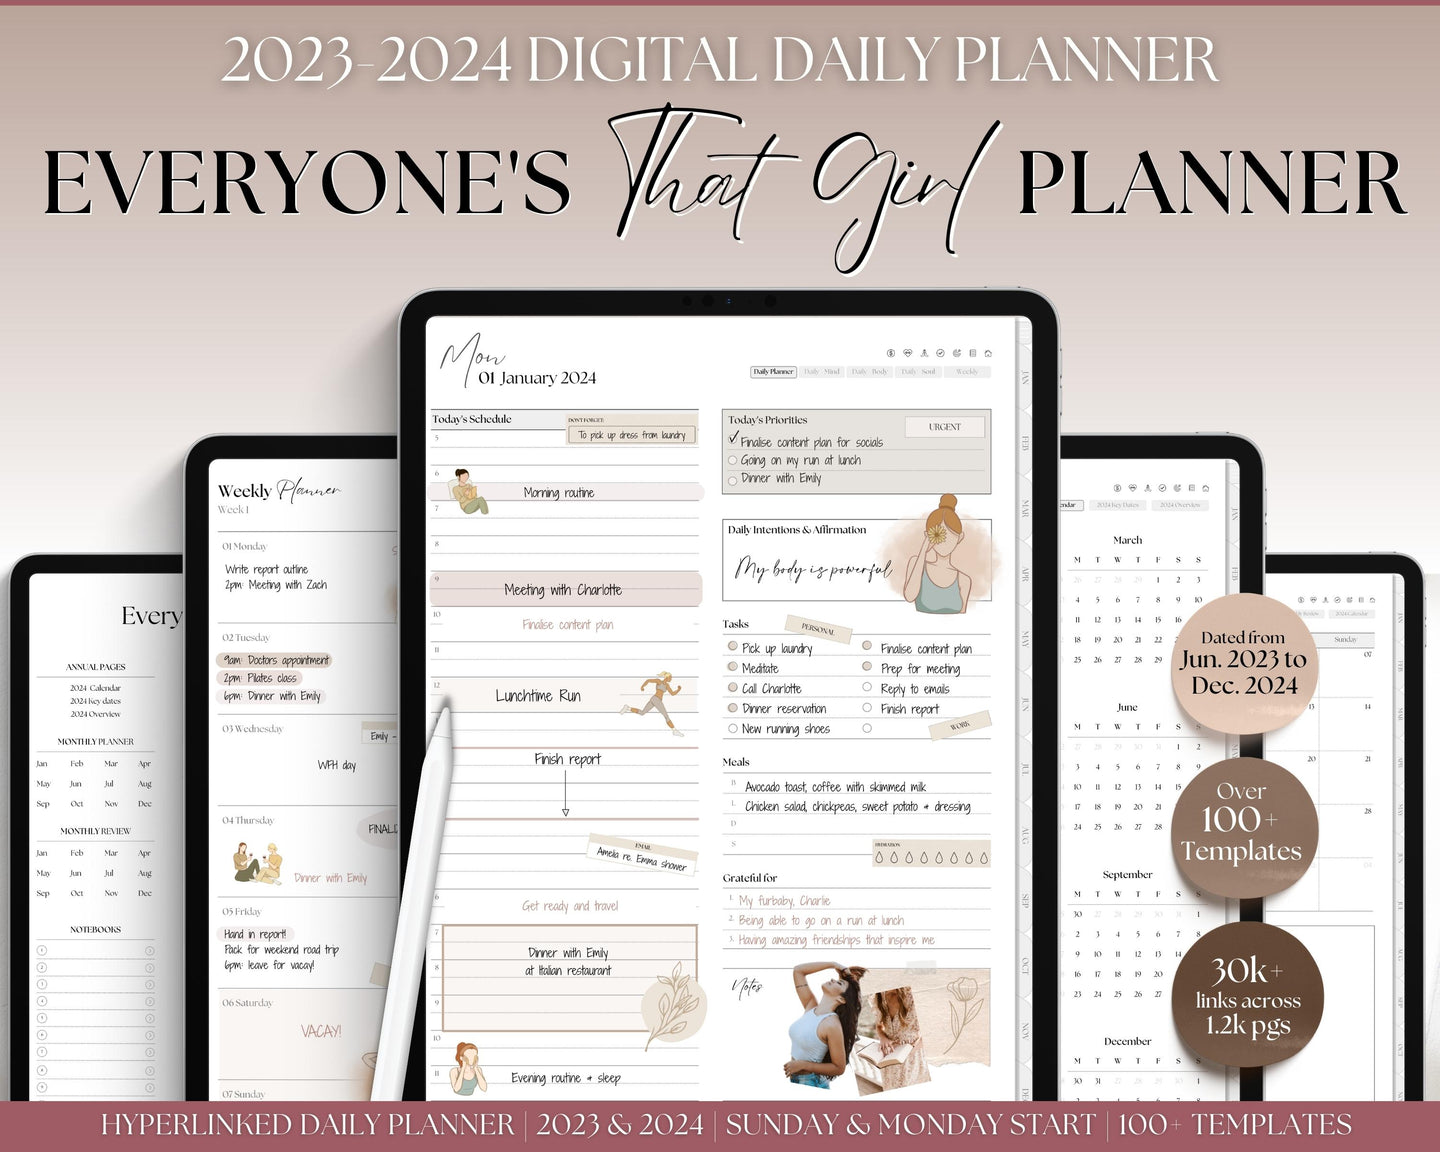 EVERYONES THAT GIRL Digital Planner 2023 2024 | Daily, Weekly, Monthly Planner for iPad and Goodnotes, That Girl Aesthetic, Undated